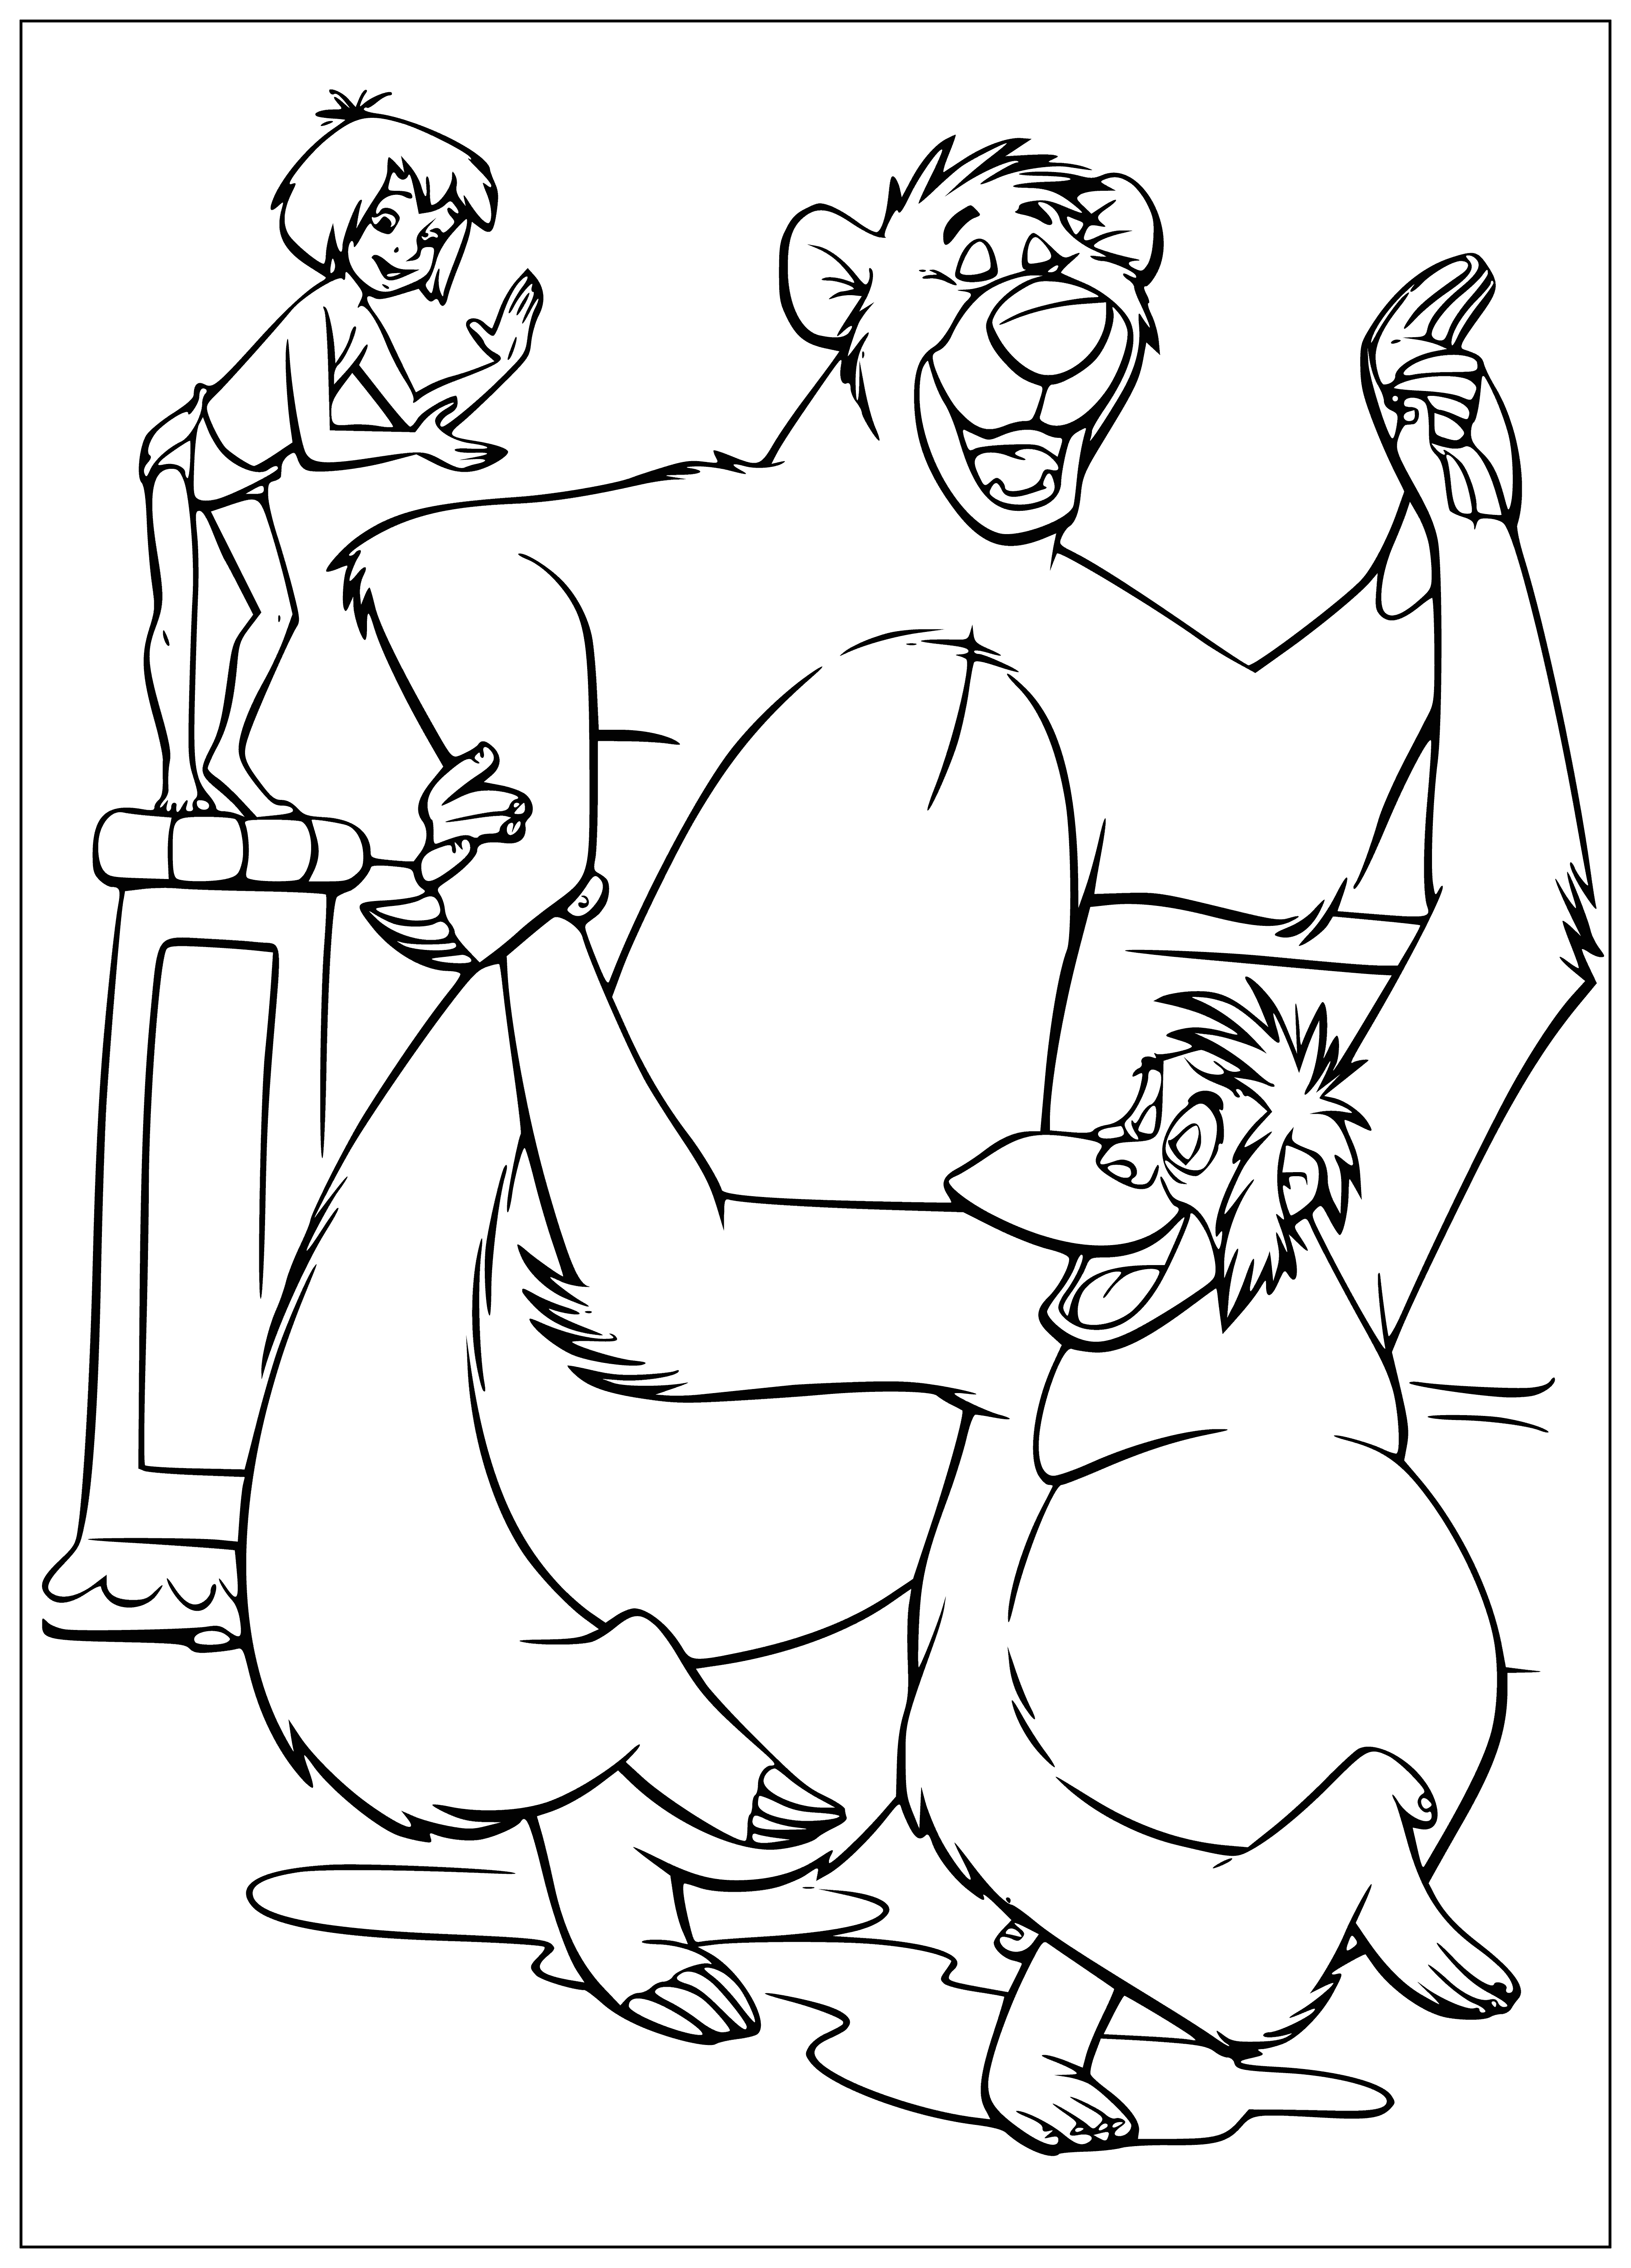 coloring page: Baloo dances in the jungle with arms outstretched, big smile on his face - joyous and delighted!